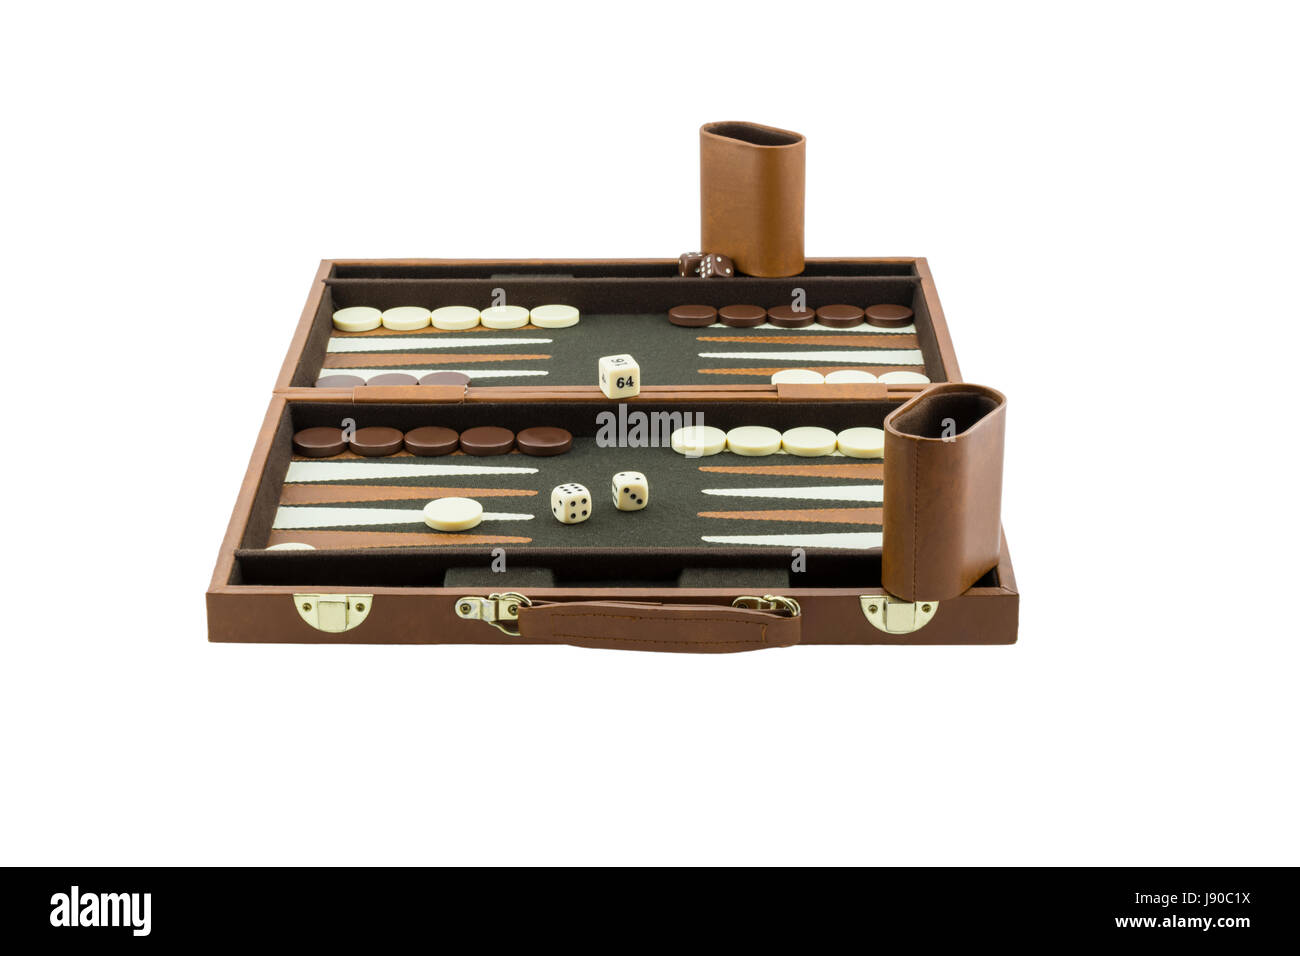 An entire backgammon board game set up and ready for play. Isolated on a pure white background. Stock Photo